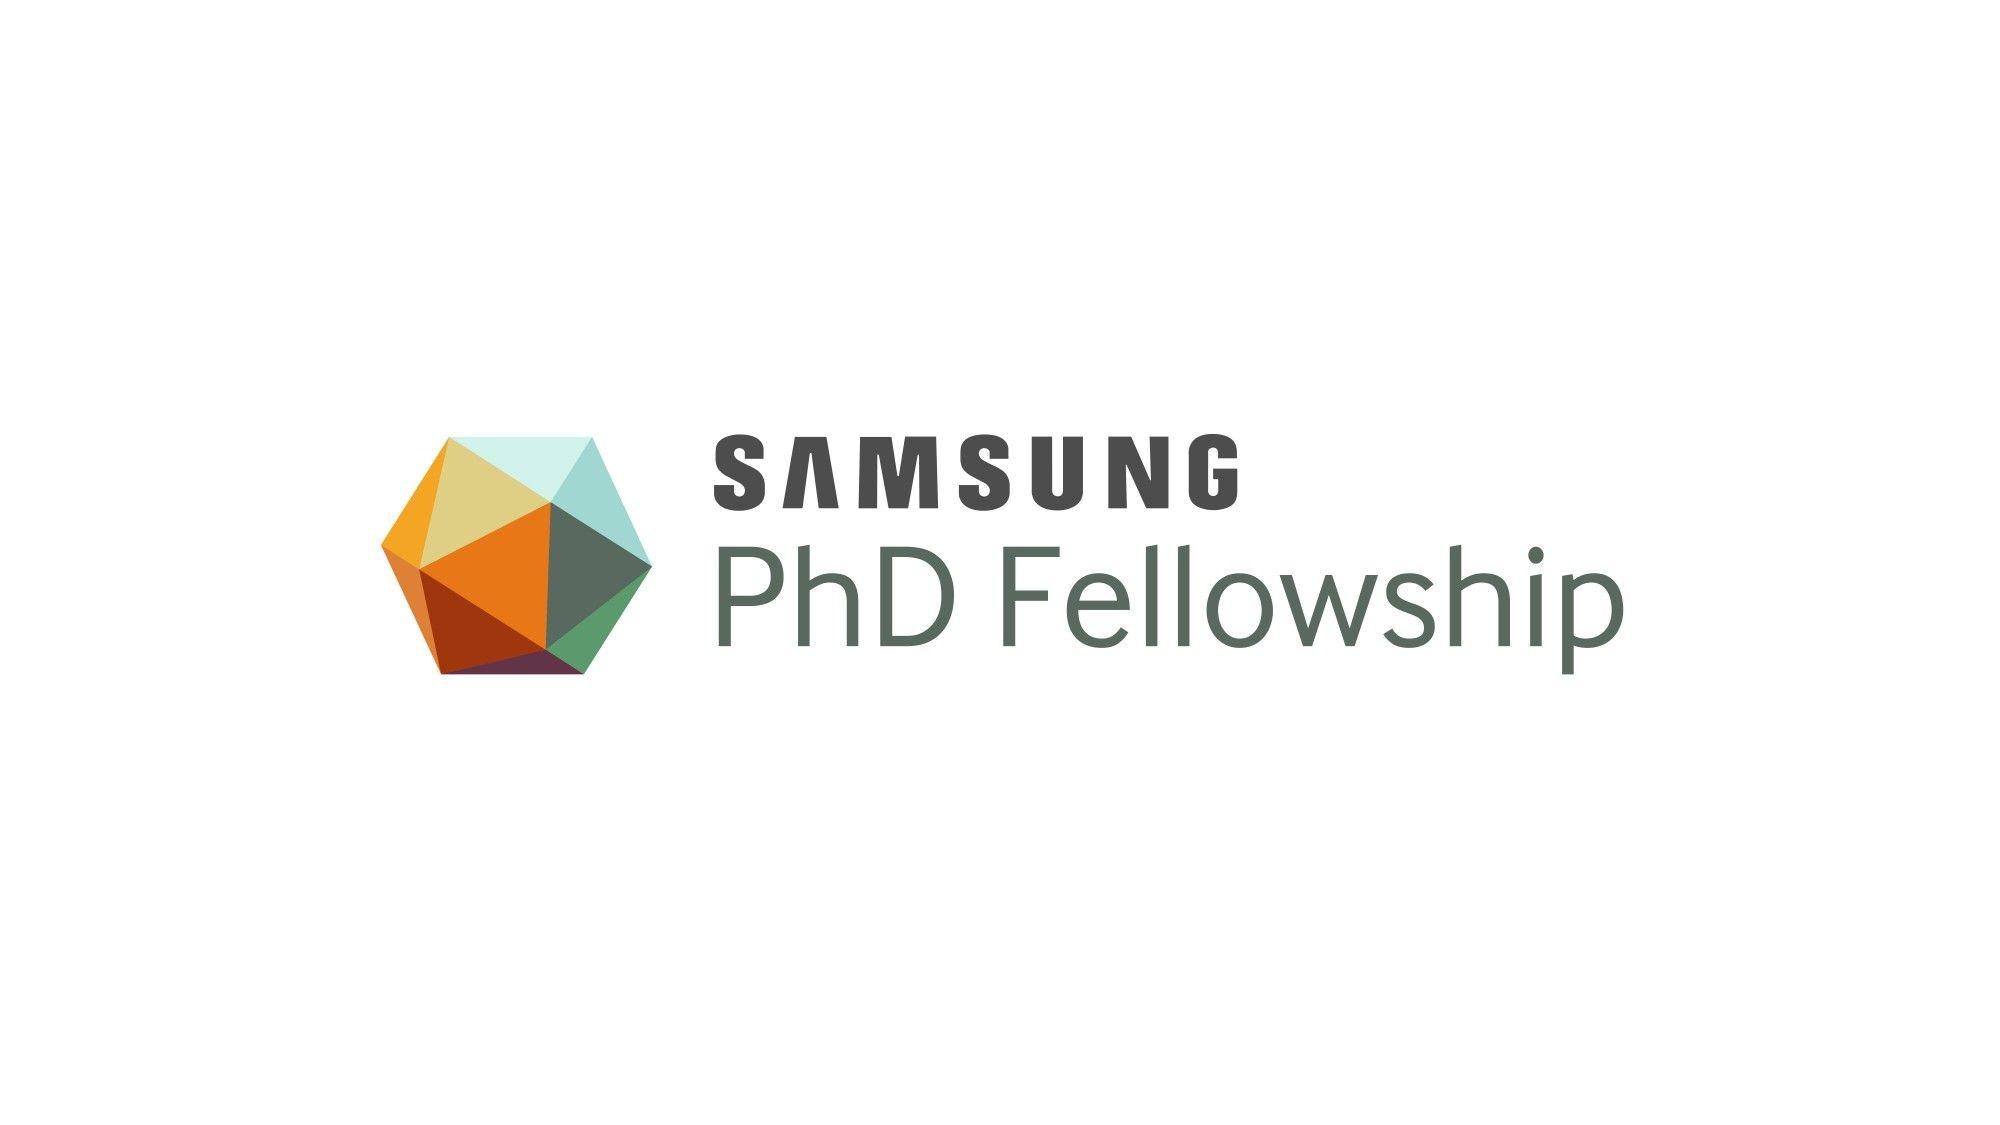 Samsung Research Logo - Samsung PhD Fellowship Program Recognizes Best and Brightest Student